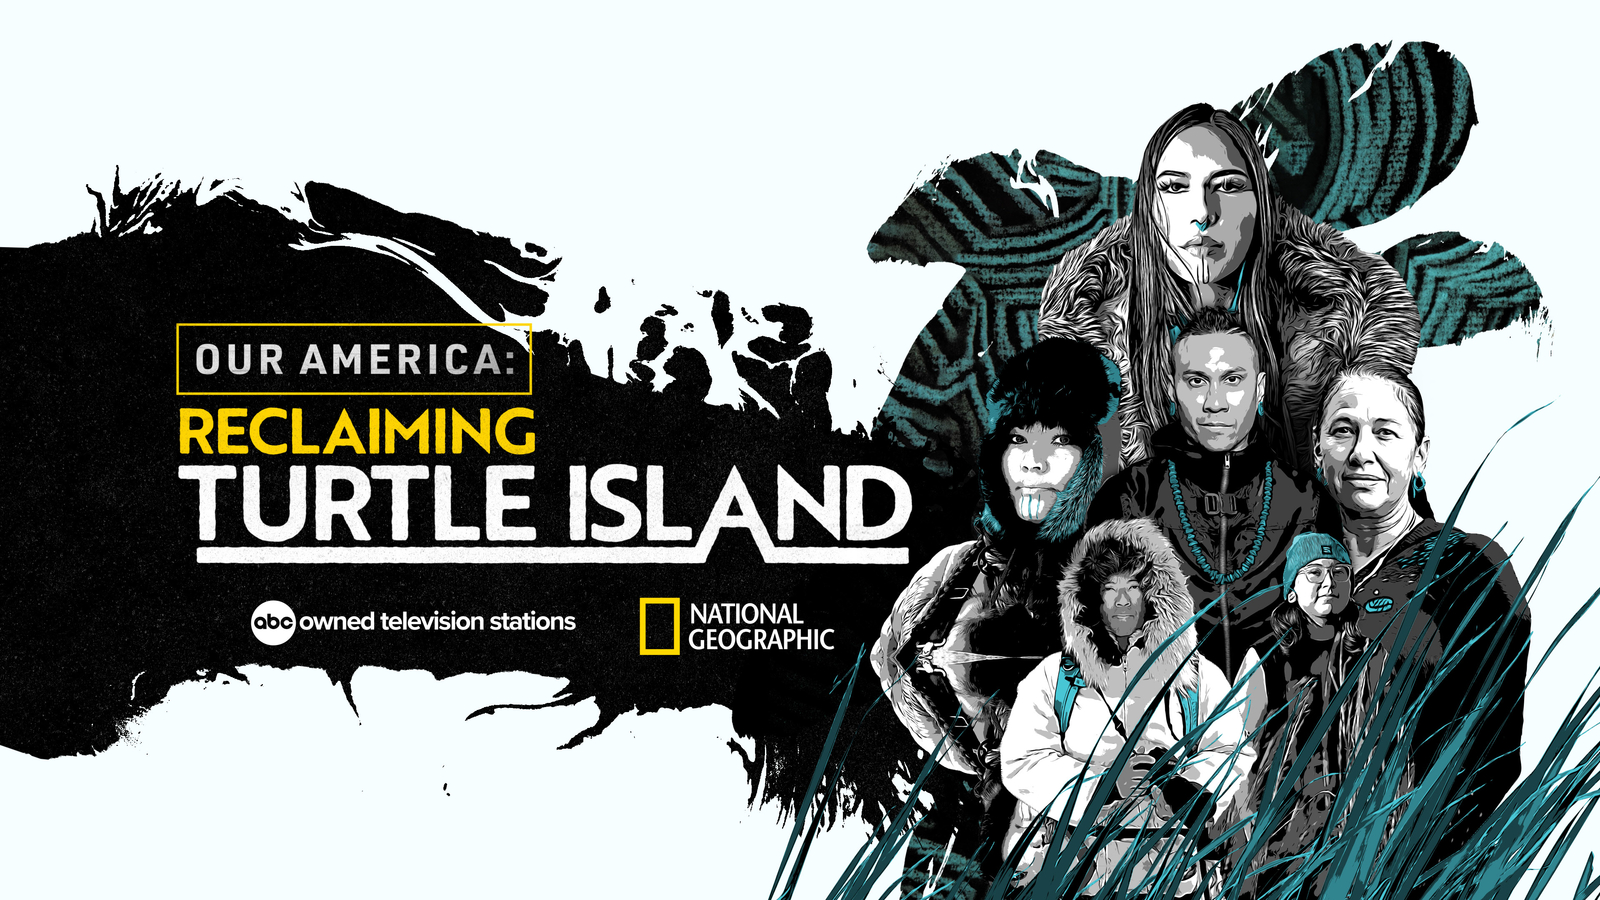 Our America: Reclaiming Turtle Island